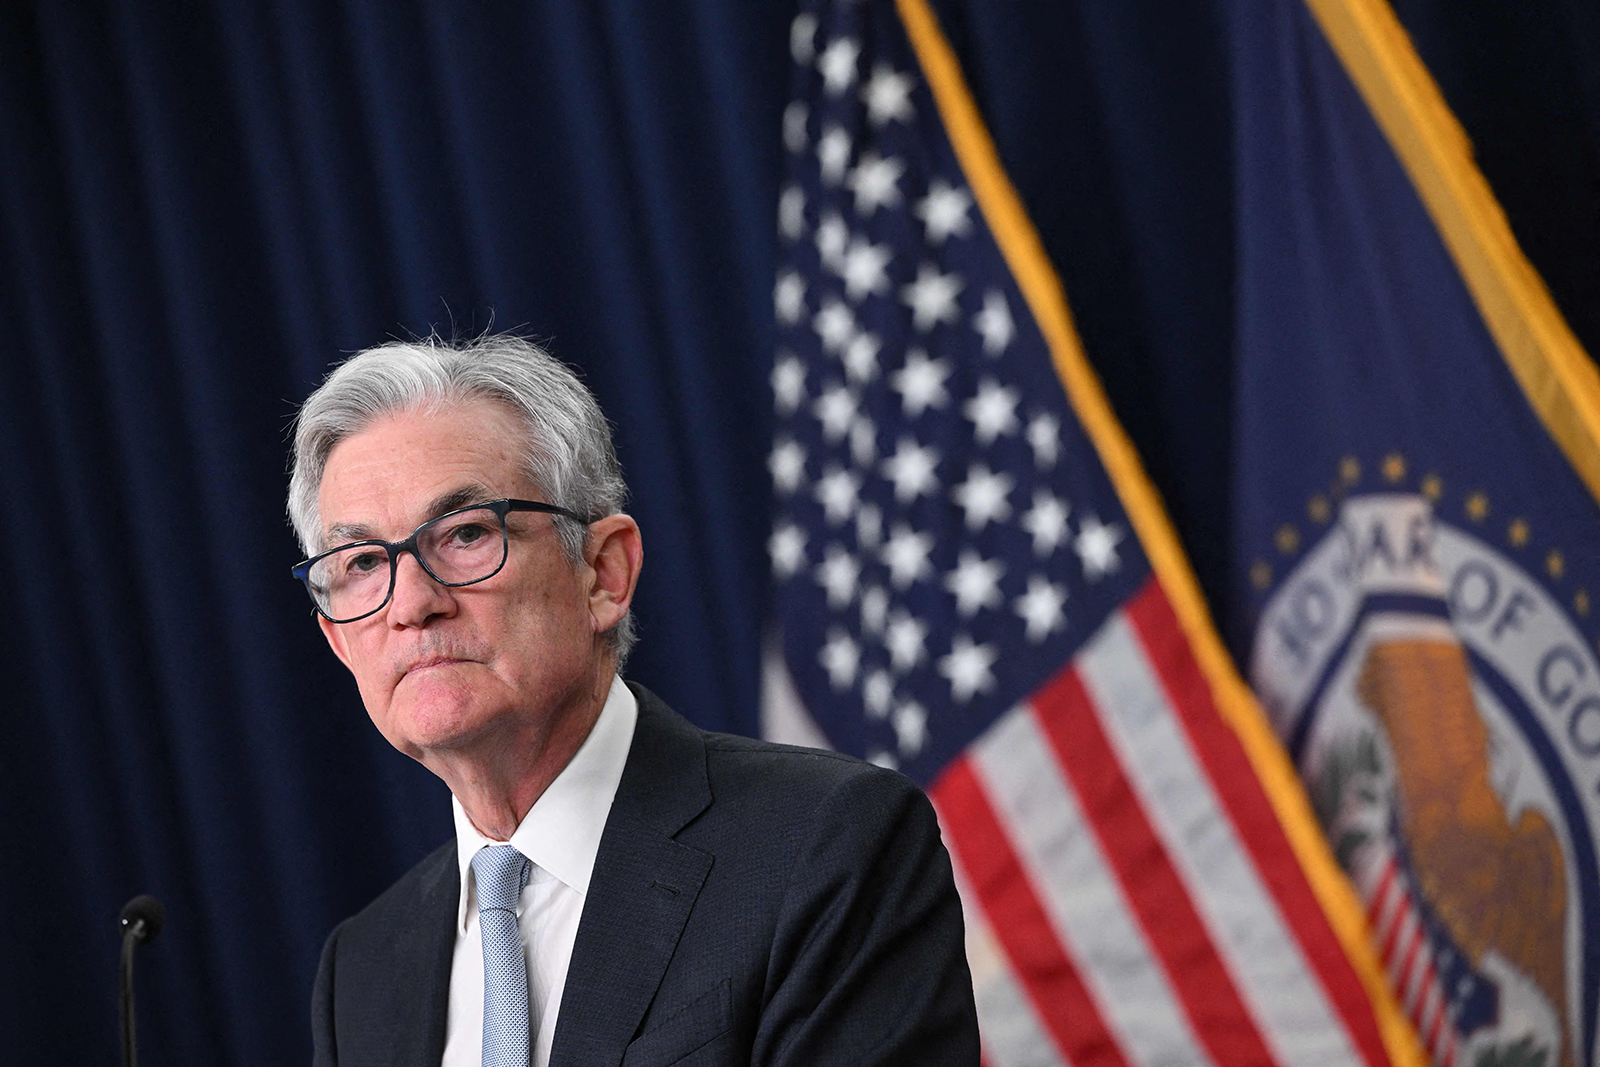 Federal Reserve Chairman Jerome Powell speaks at a news conference today after the Federal Open Market Committee meeting at the Federal Reserve Building in Washington, DC.